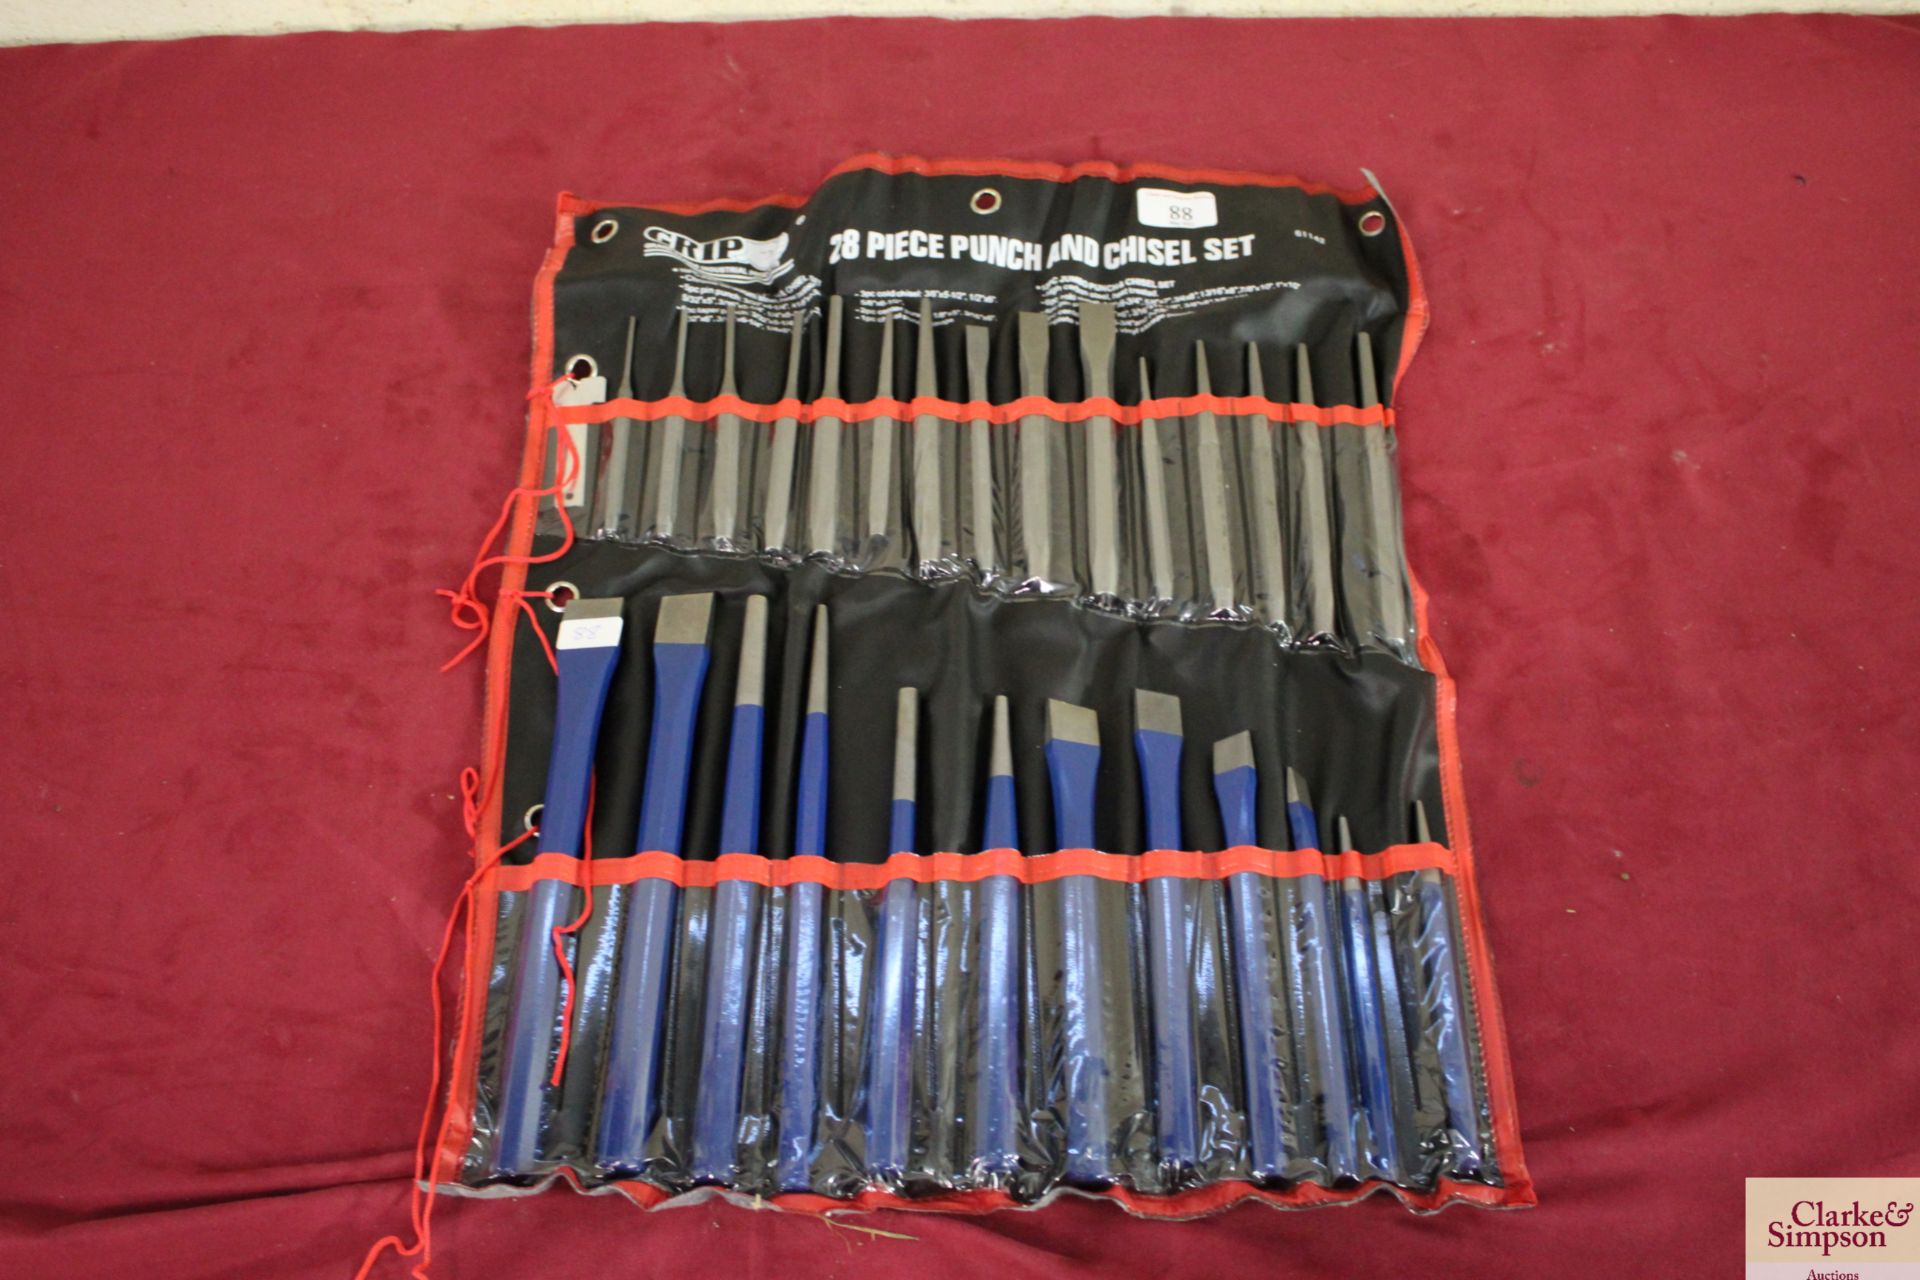 28 piece Punch and chisel set. V